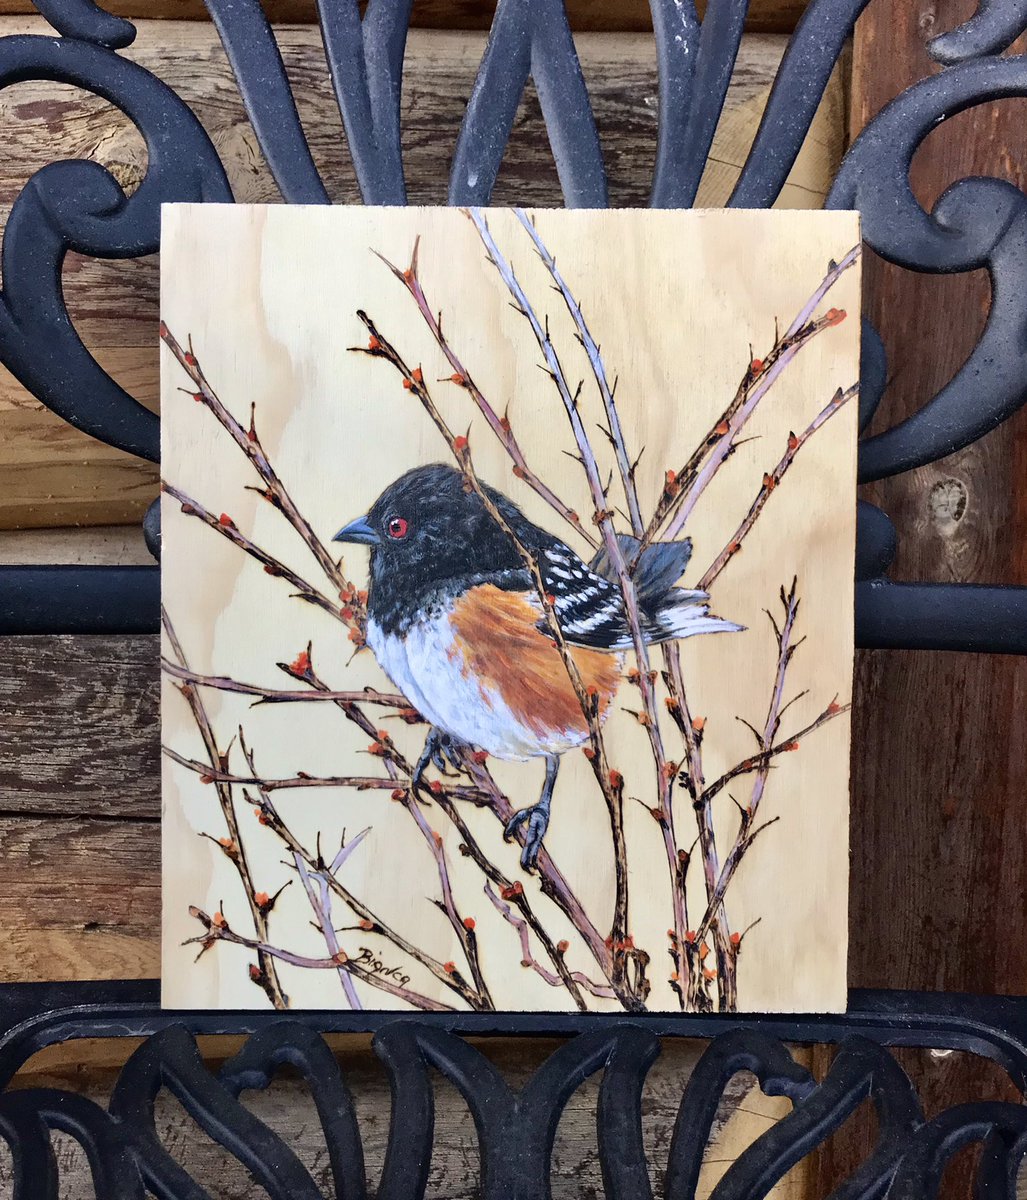 This is my second attempt at pyrography and feeling happy with the results.  I really enjoy, ‘ filling in the blanks’ with colour! 😃

#paintedbirds #spottedtowhee #woodburning #okanagan #pyrography #biancacraigart #artist #okanaganartists  #woodpanels #bcwildlife #osoyoos